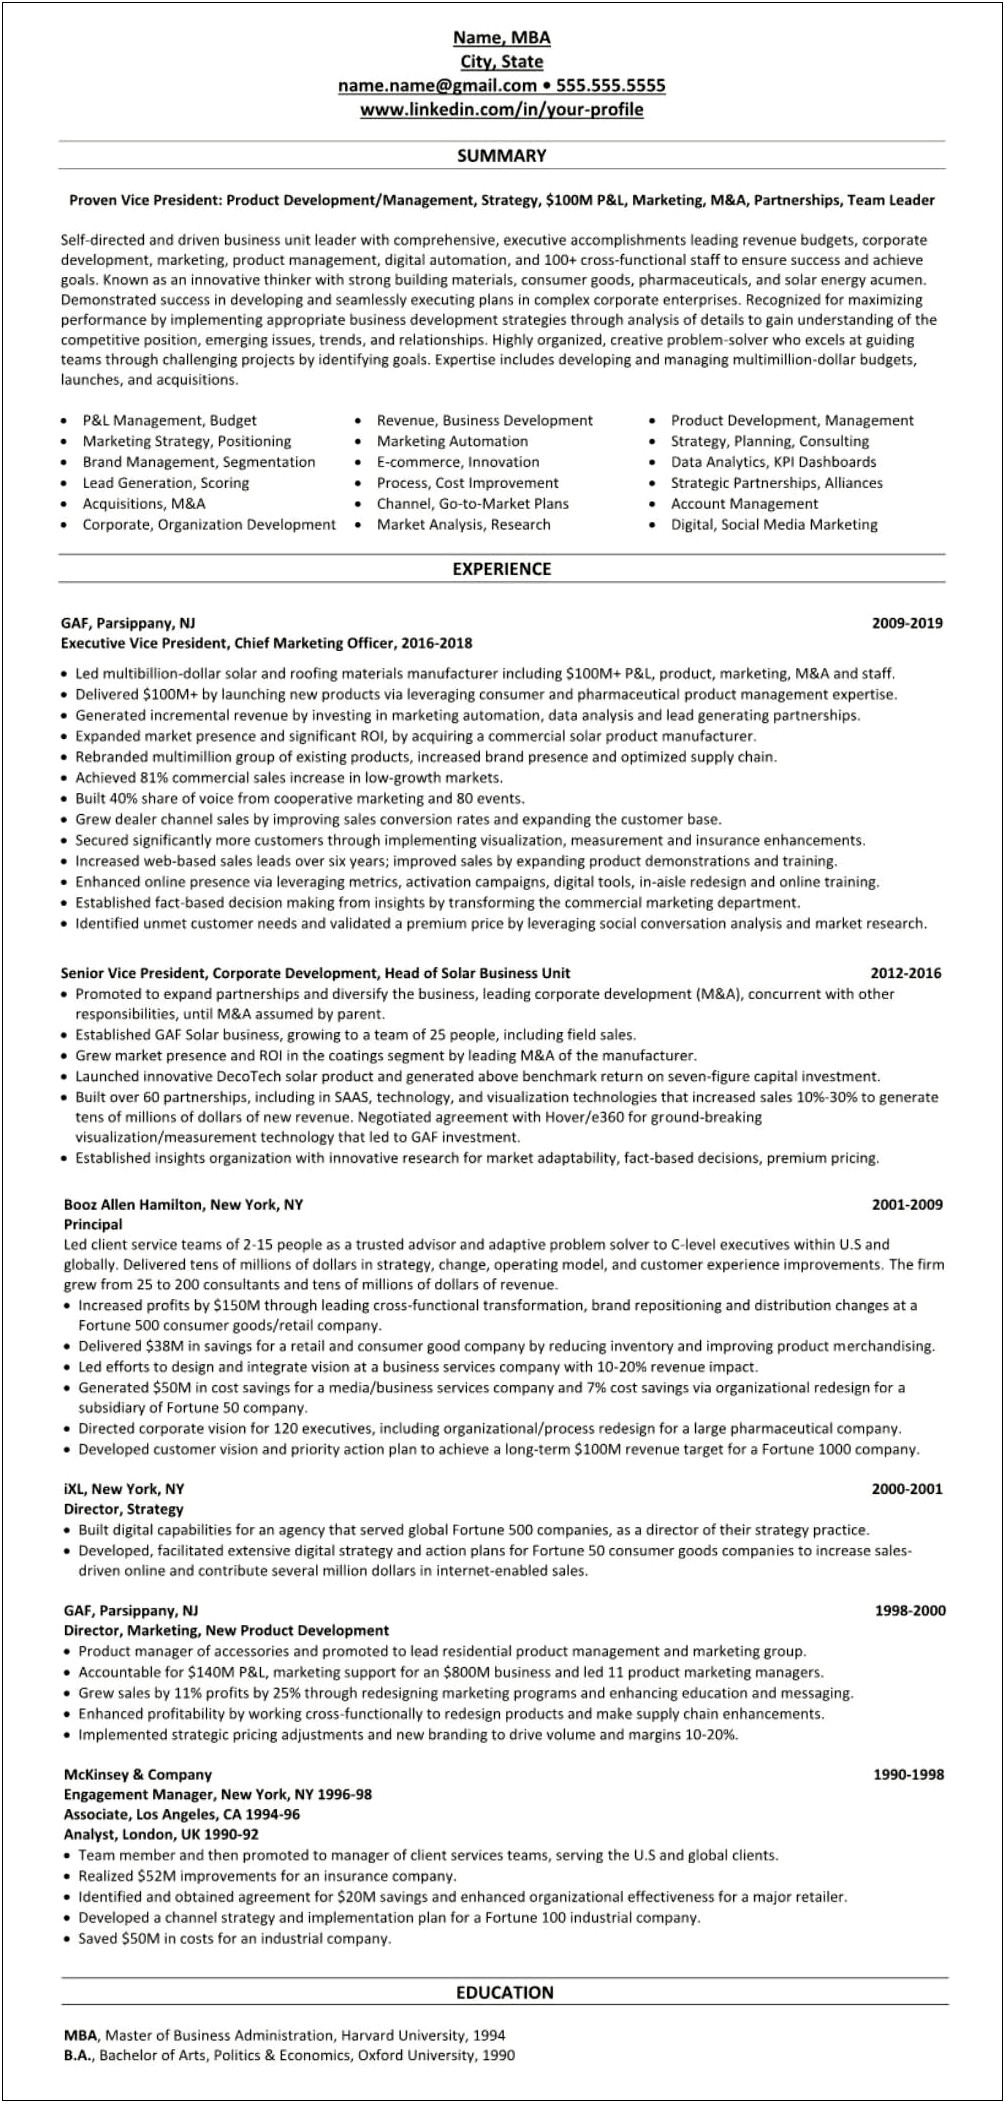 Resume Examples Of Managing Budget And P&l